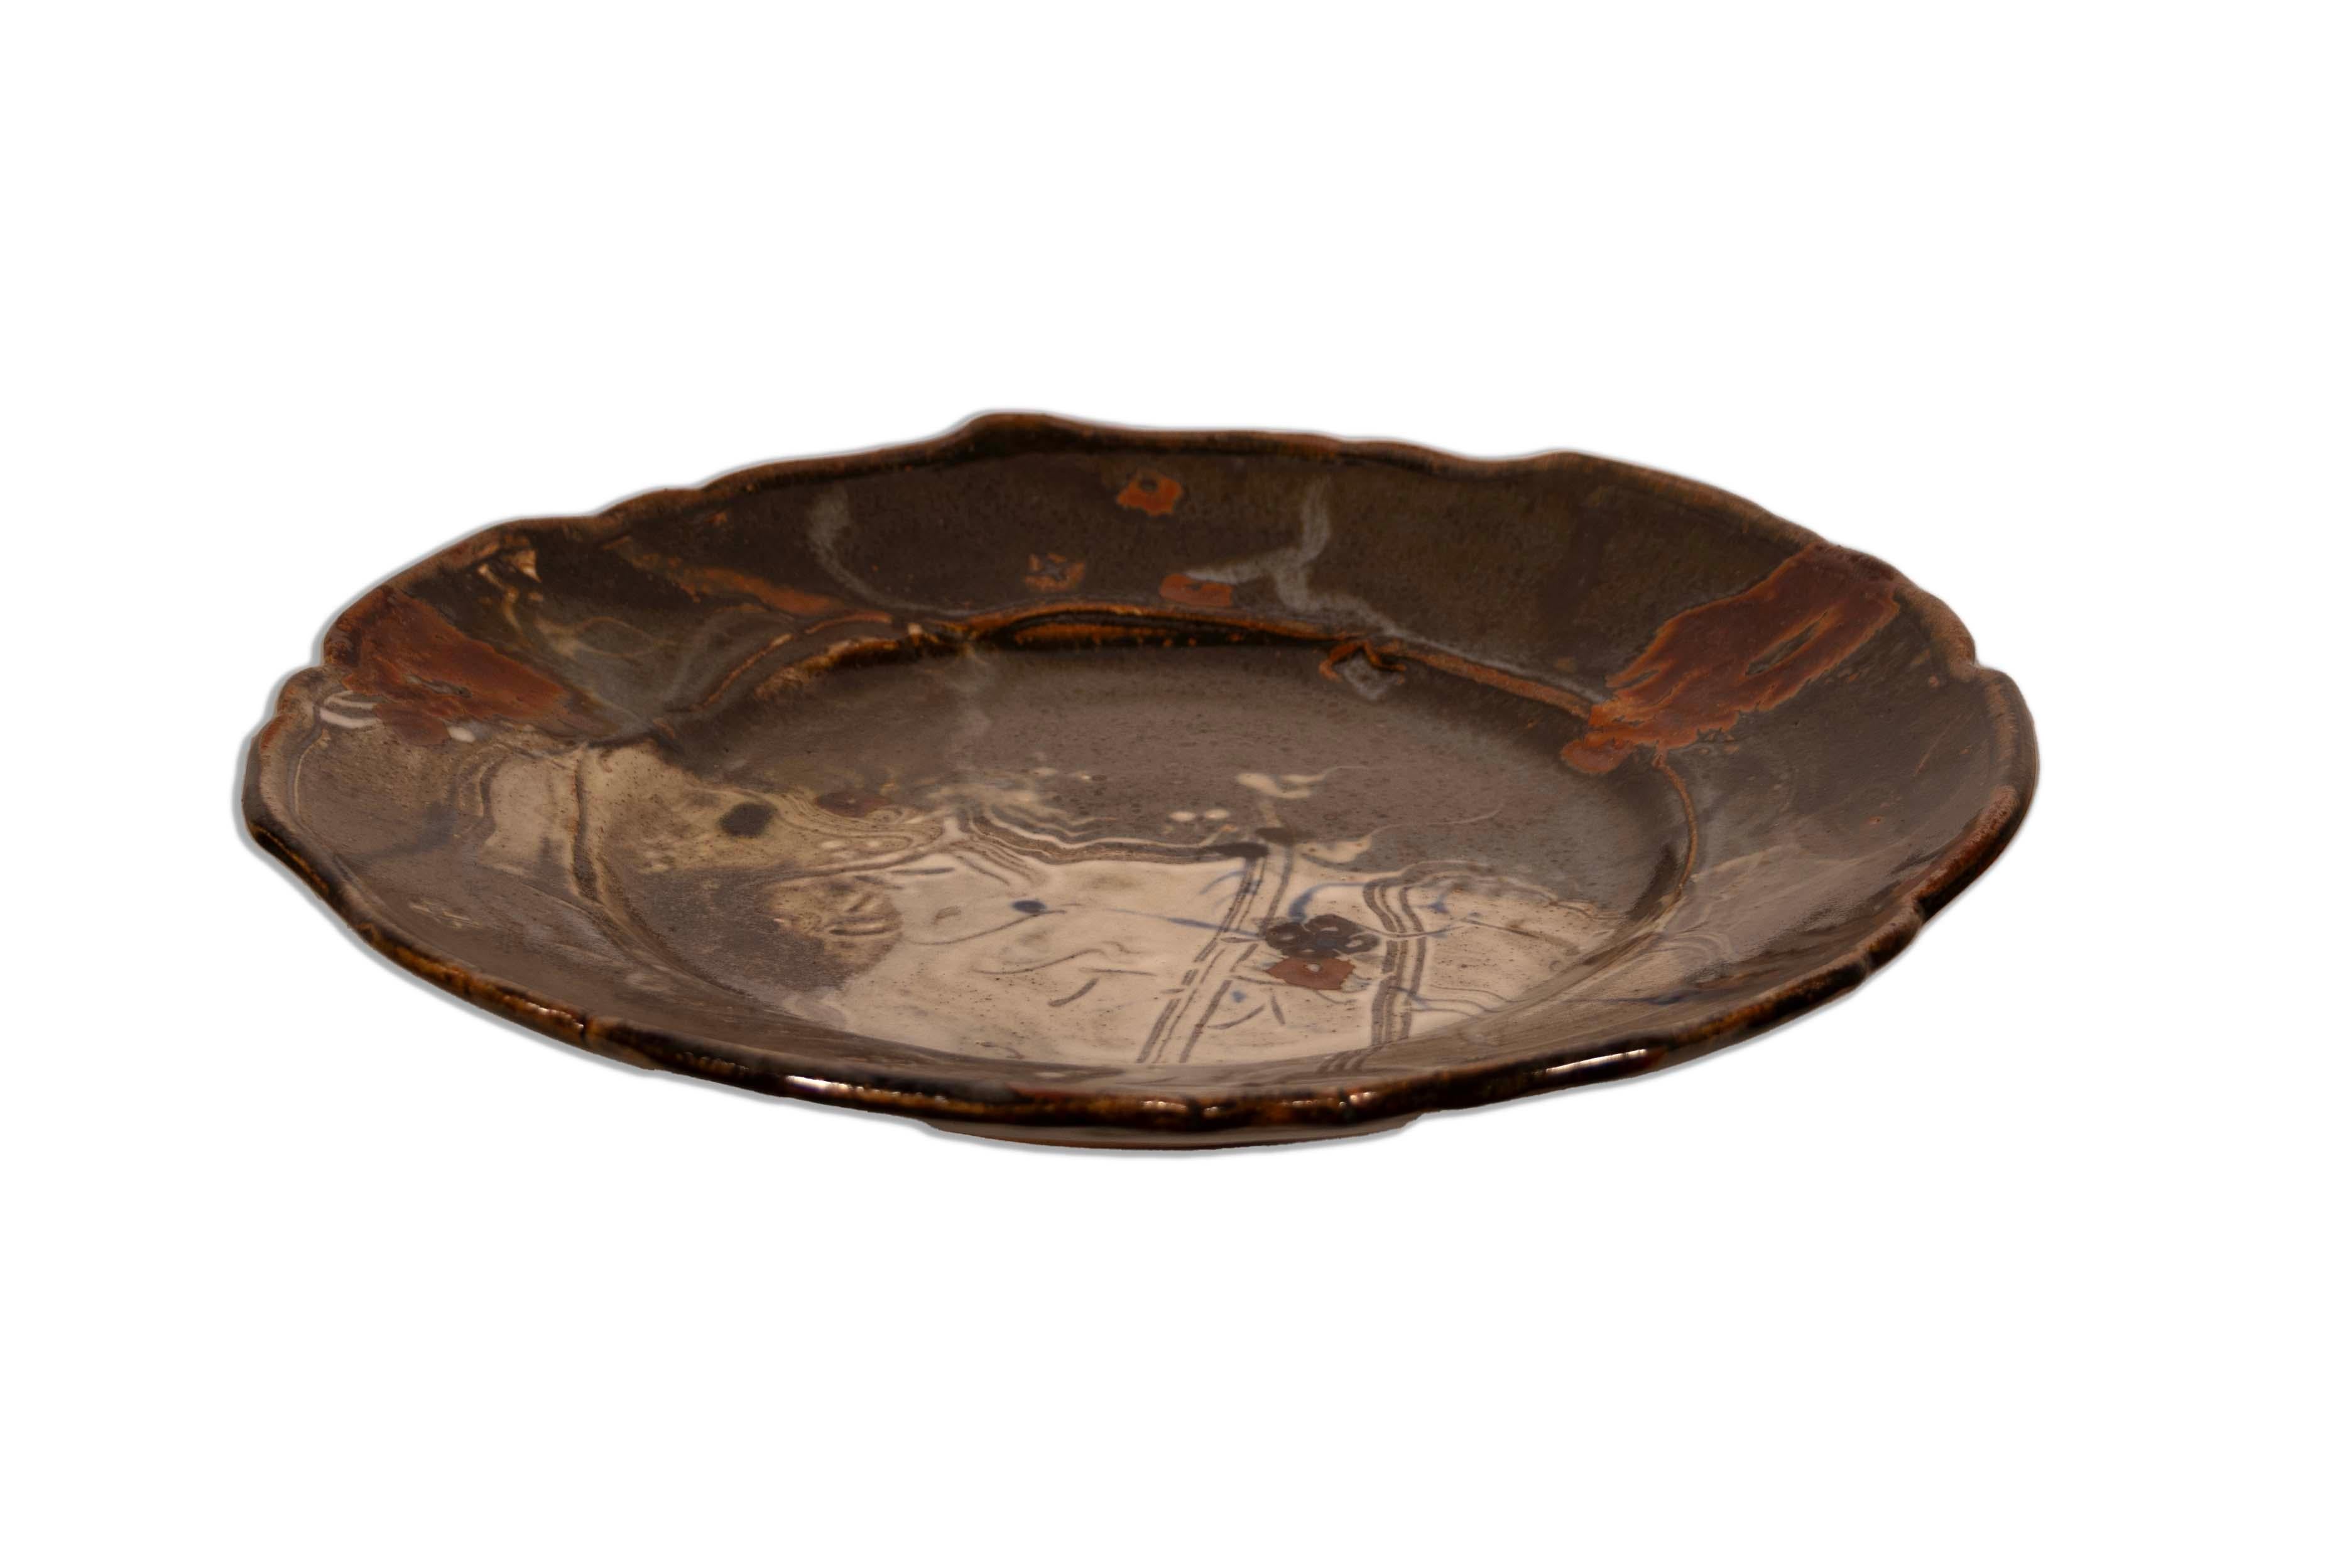  Discover this captivating Mid Century Modern Plum Tree Charger Plate by the renowned potter John Glick. This artistic ceramic plate is a conversation piece, featuring a harmonious blend of earthy tones, subtle textures, and an organic, flowing